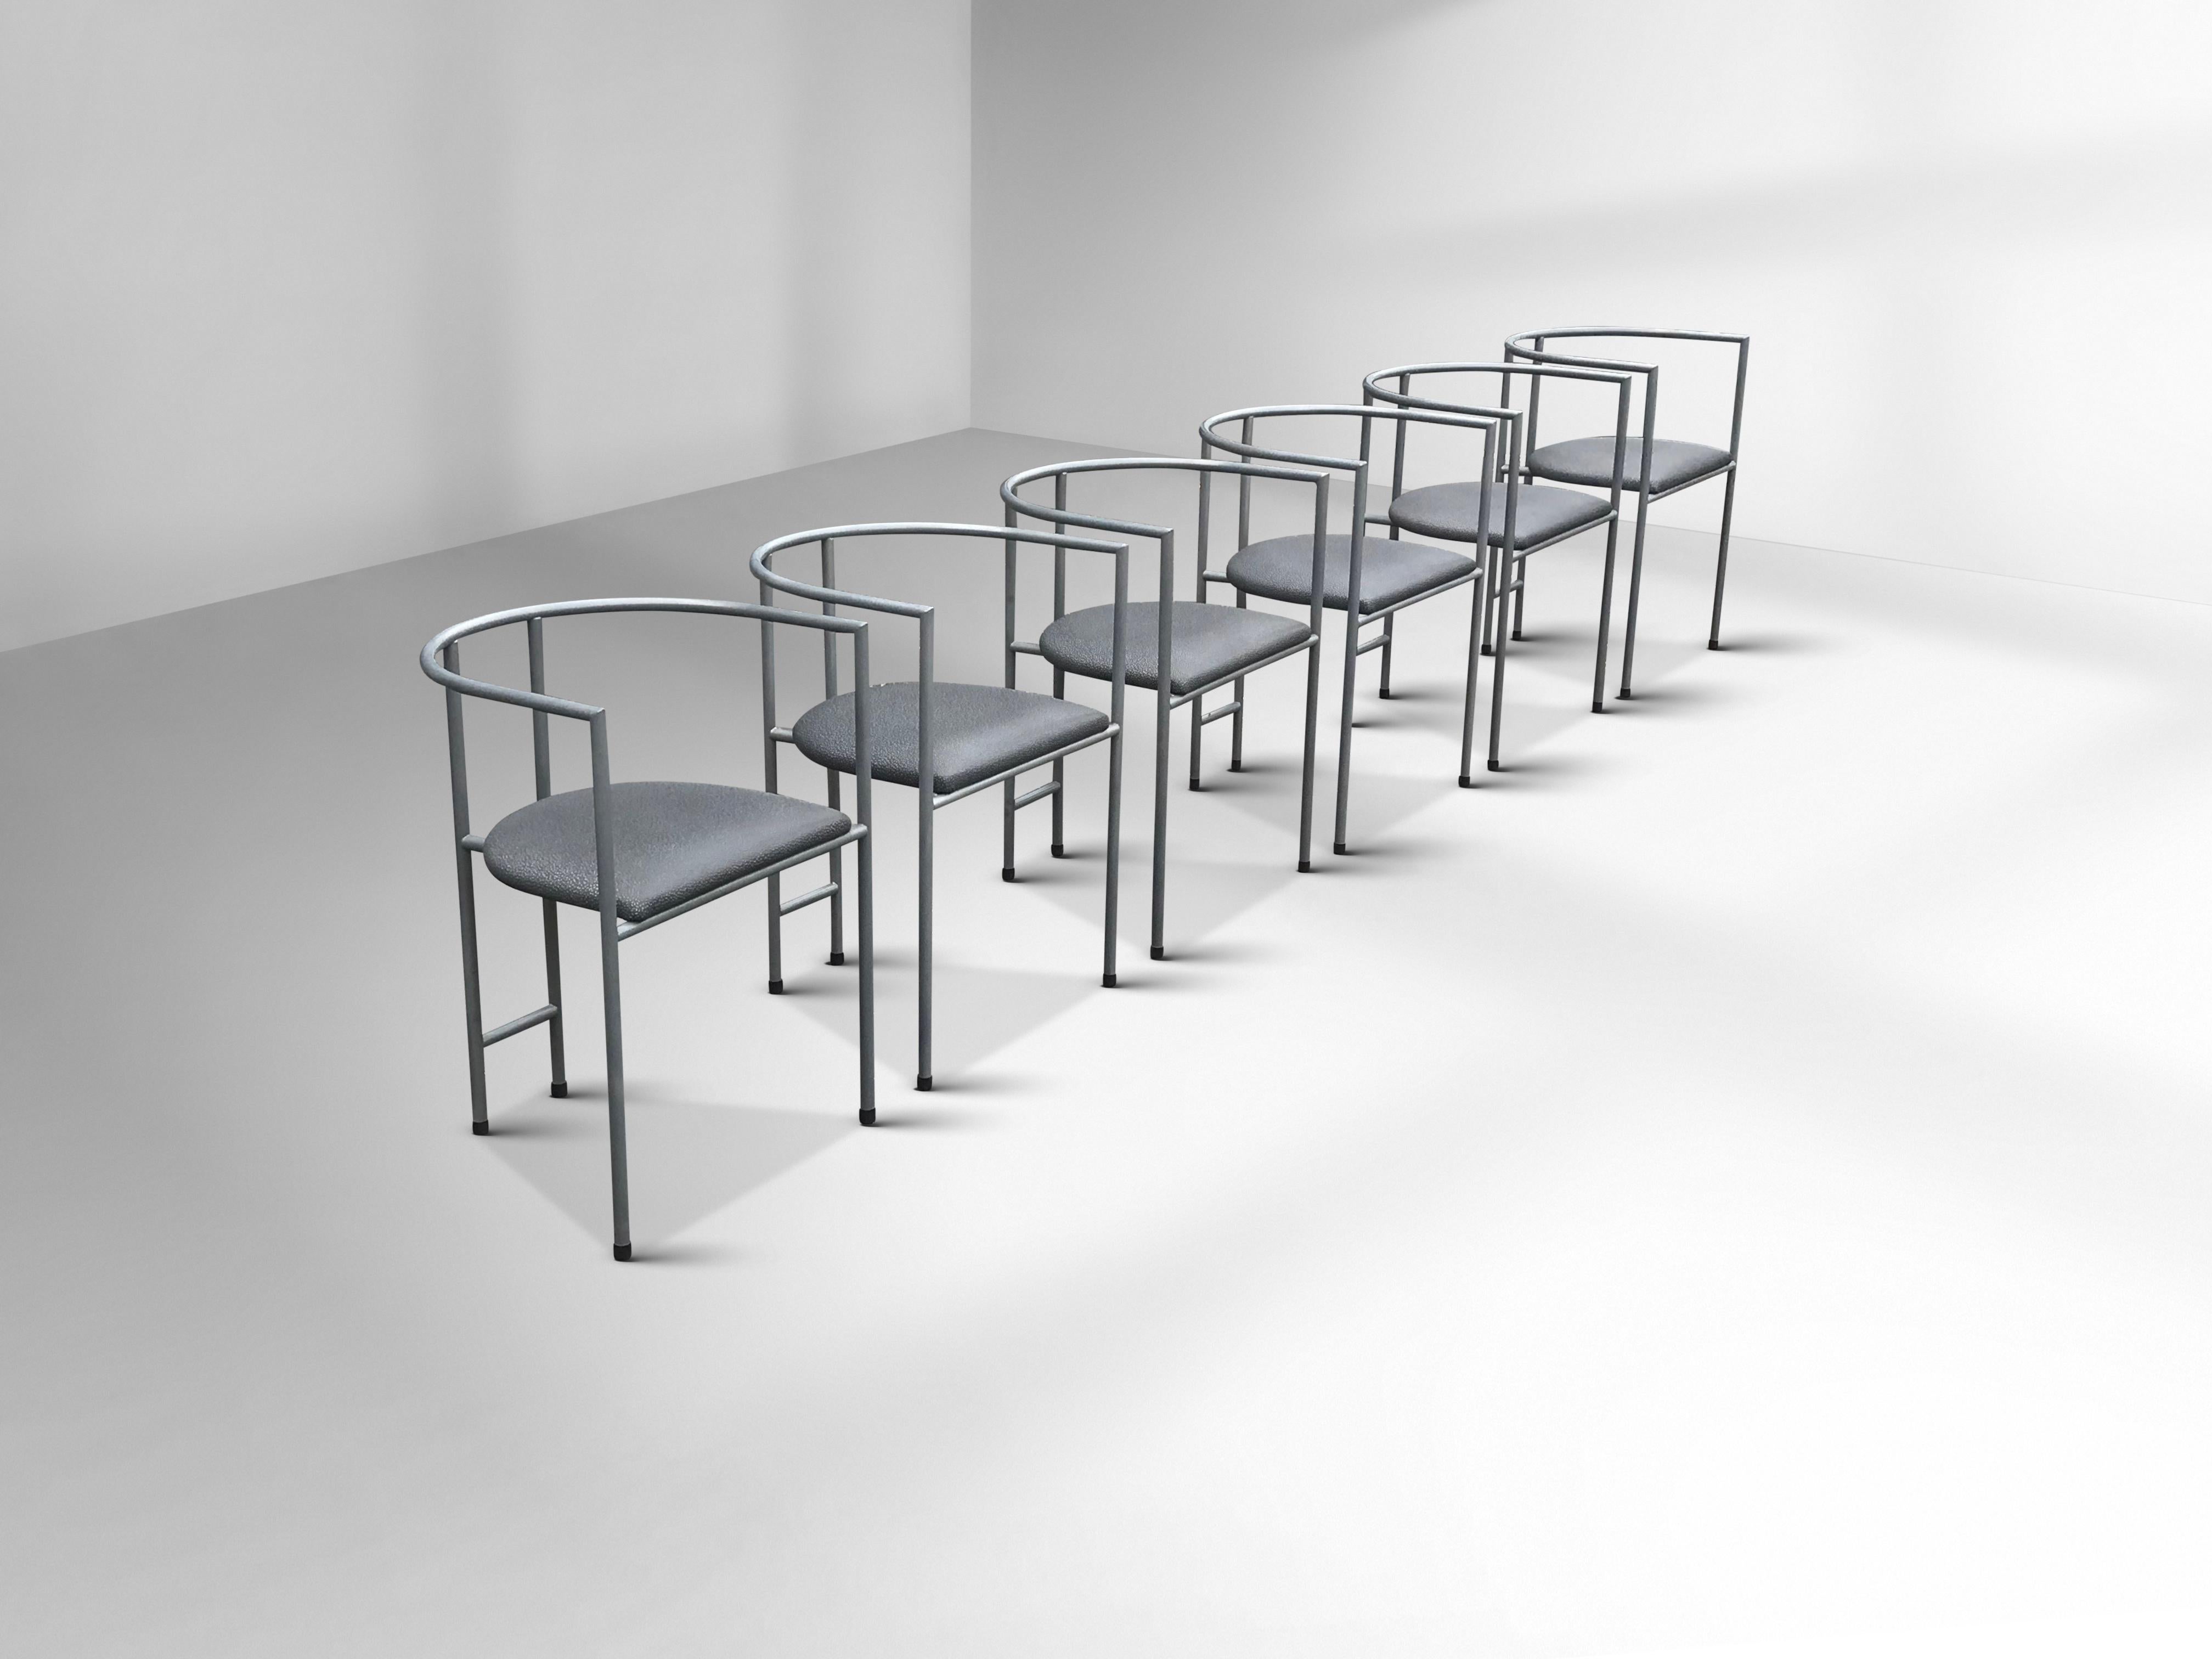 Set of Rodney Kinsman Tokyo chairs. Beauty and simplicity combined into one design. These Tokyo chairs are a rare design variant with armrests with grey frame and grey skai.

Rodney Kinsman (United Kingdom, 1943)  studied furniture design at the